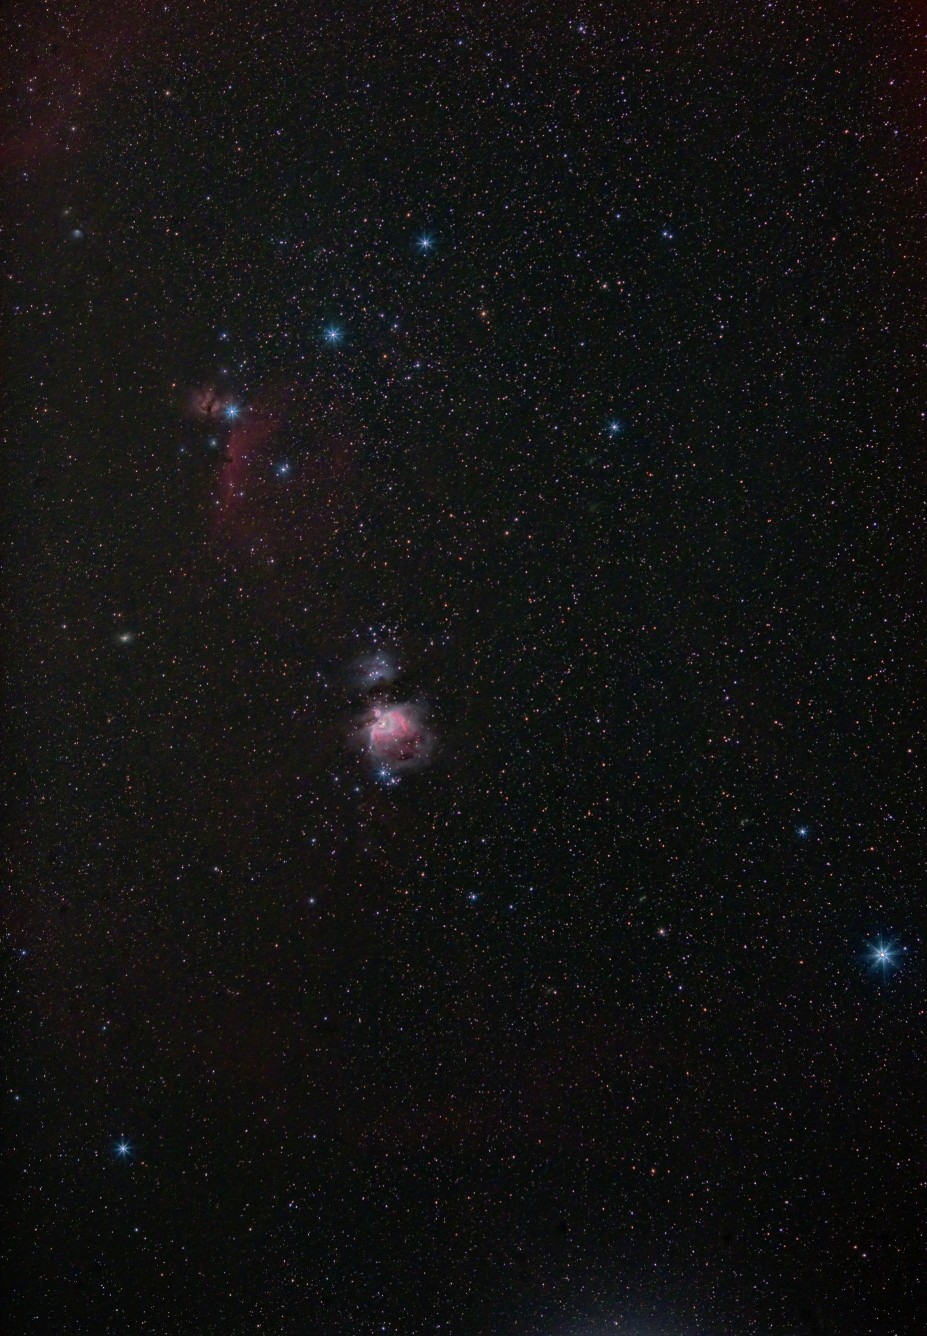 South part of Orion